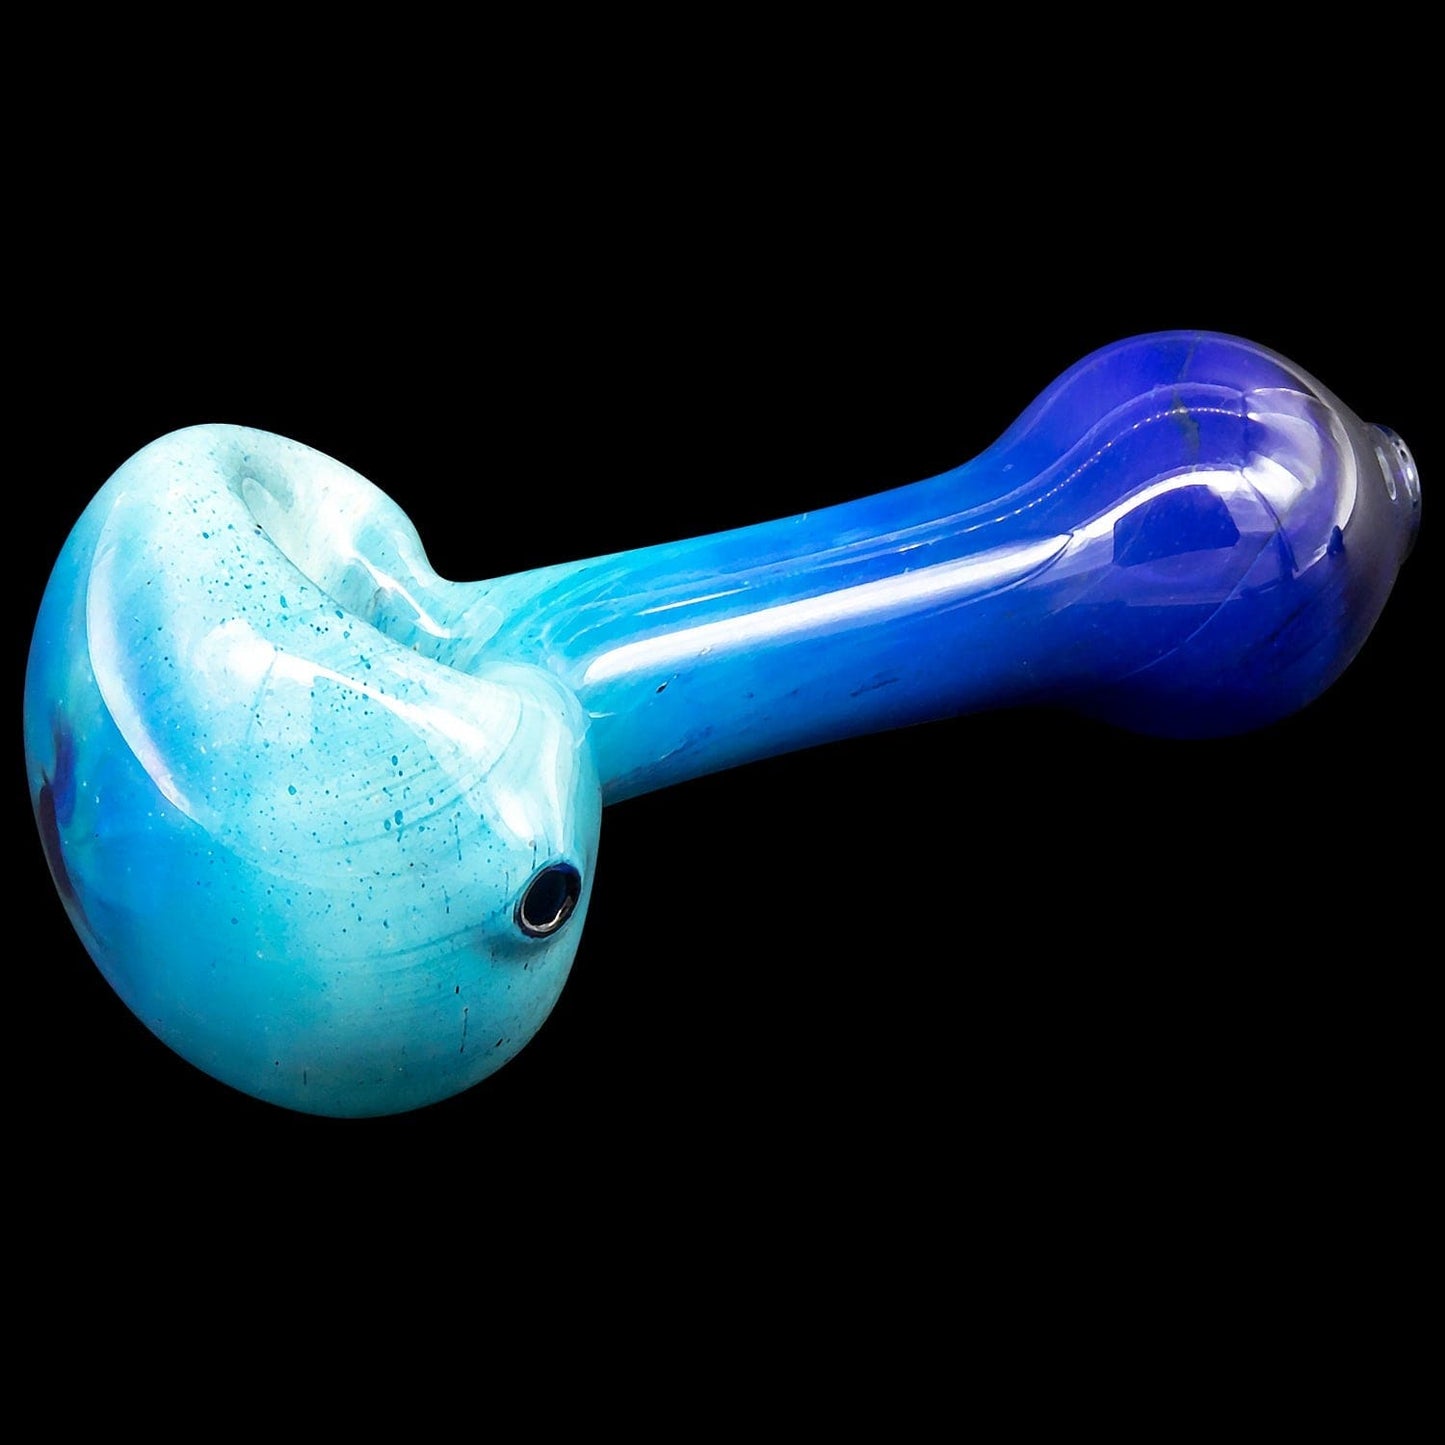 LA Pipes Hand Pipe "Galaxy" Fumed Spoon Pipe